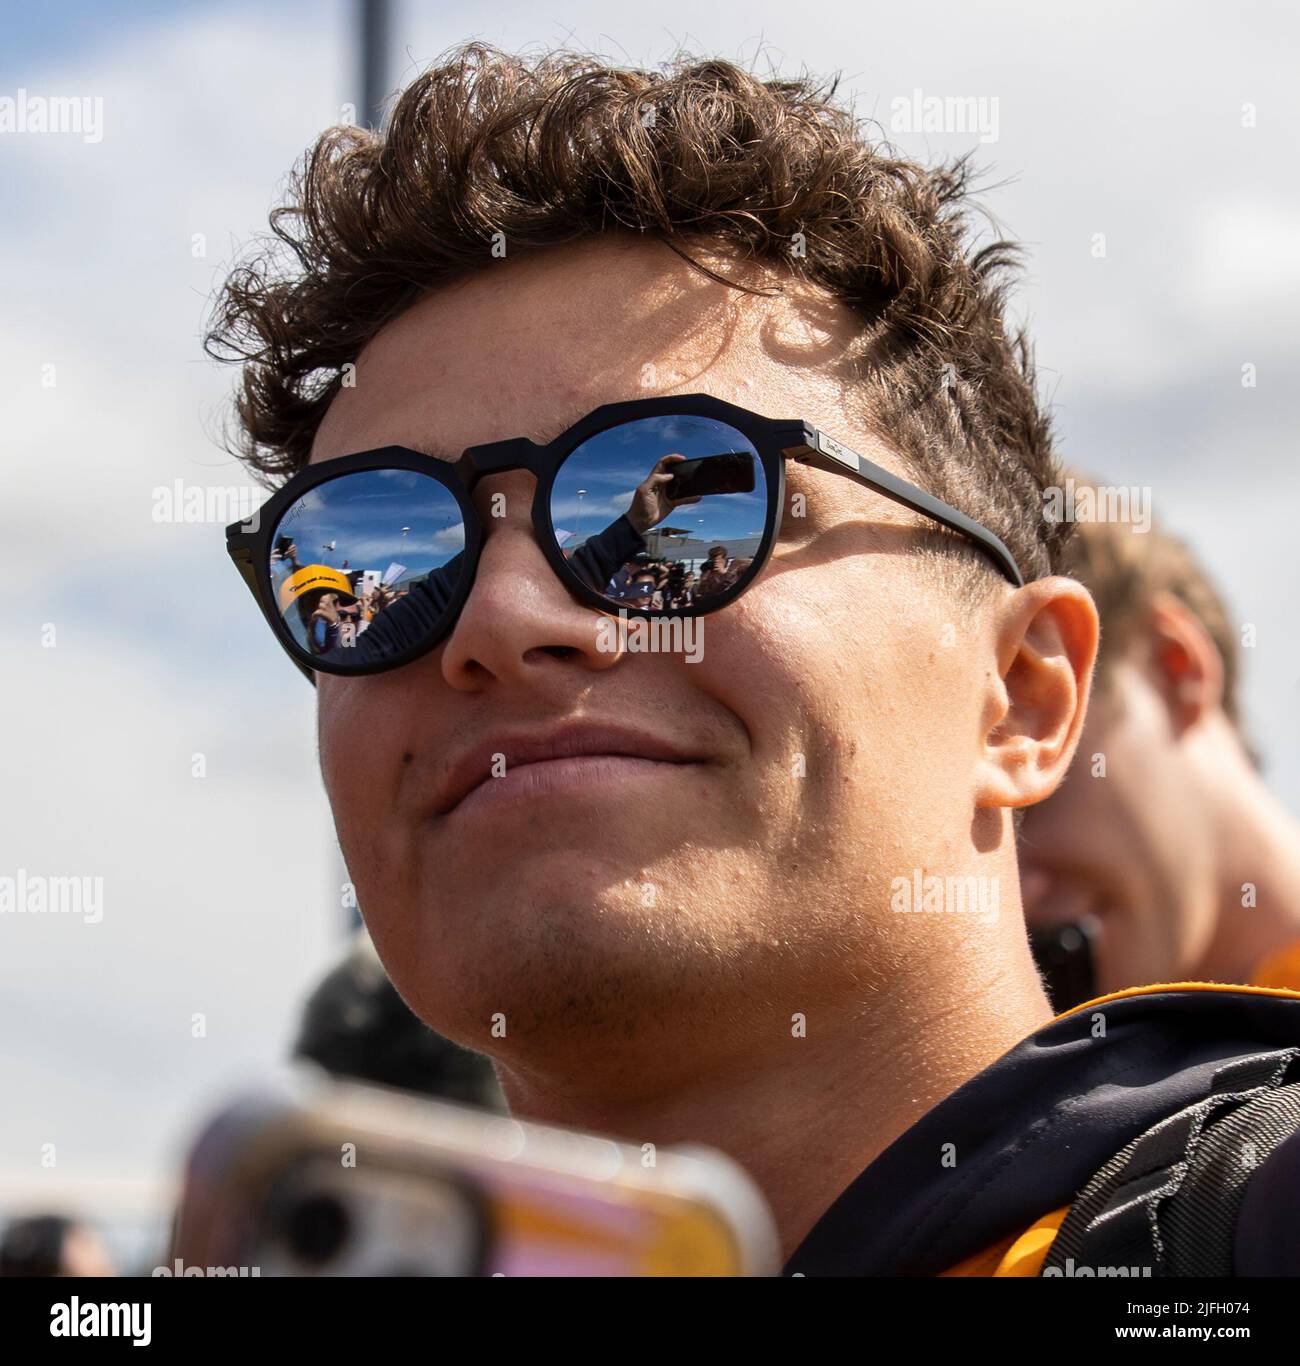 Silverstone, UK. 3rd July 2022, Silverstone Circuit, Silverstone, Northamptonshire, England: British F1 Grand Prix, Race day: McLaren F1 Team driver Lando Norris takes a selfie Credit: Action Plus Sports Images/Alamy Live News Stock Photo